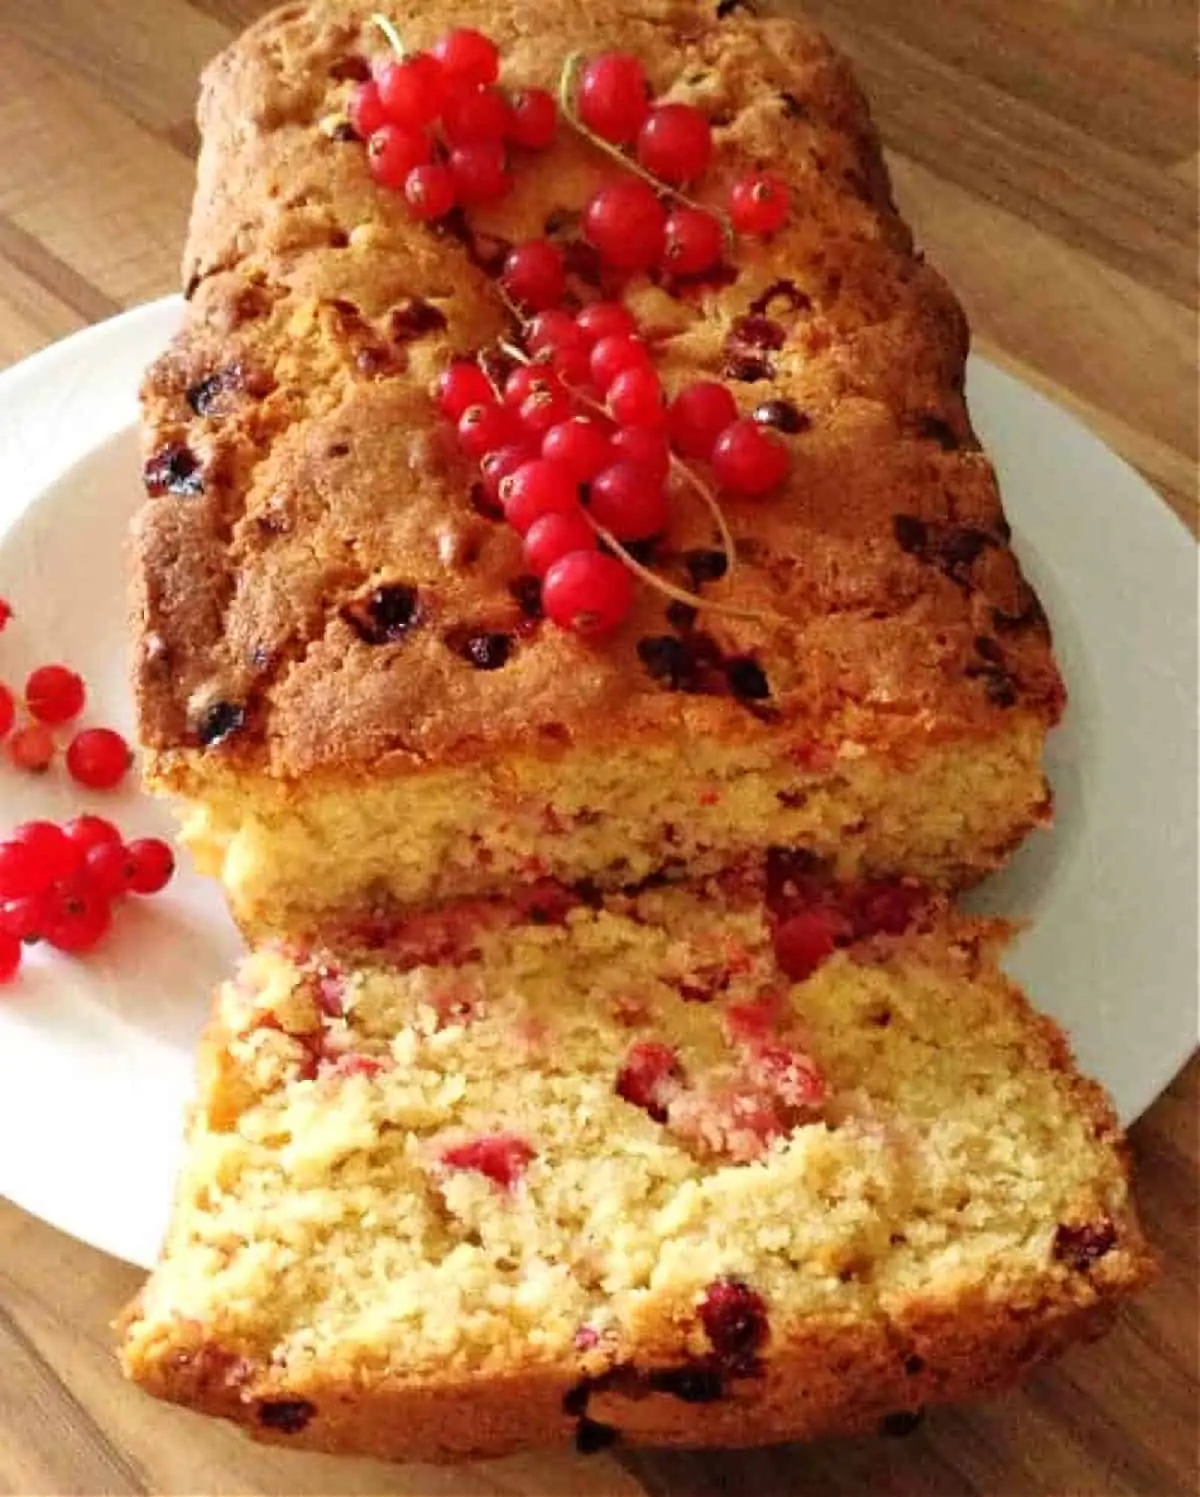 A loaf cake filled with redcurrant cut open on a white plate.